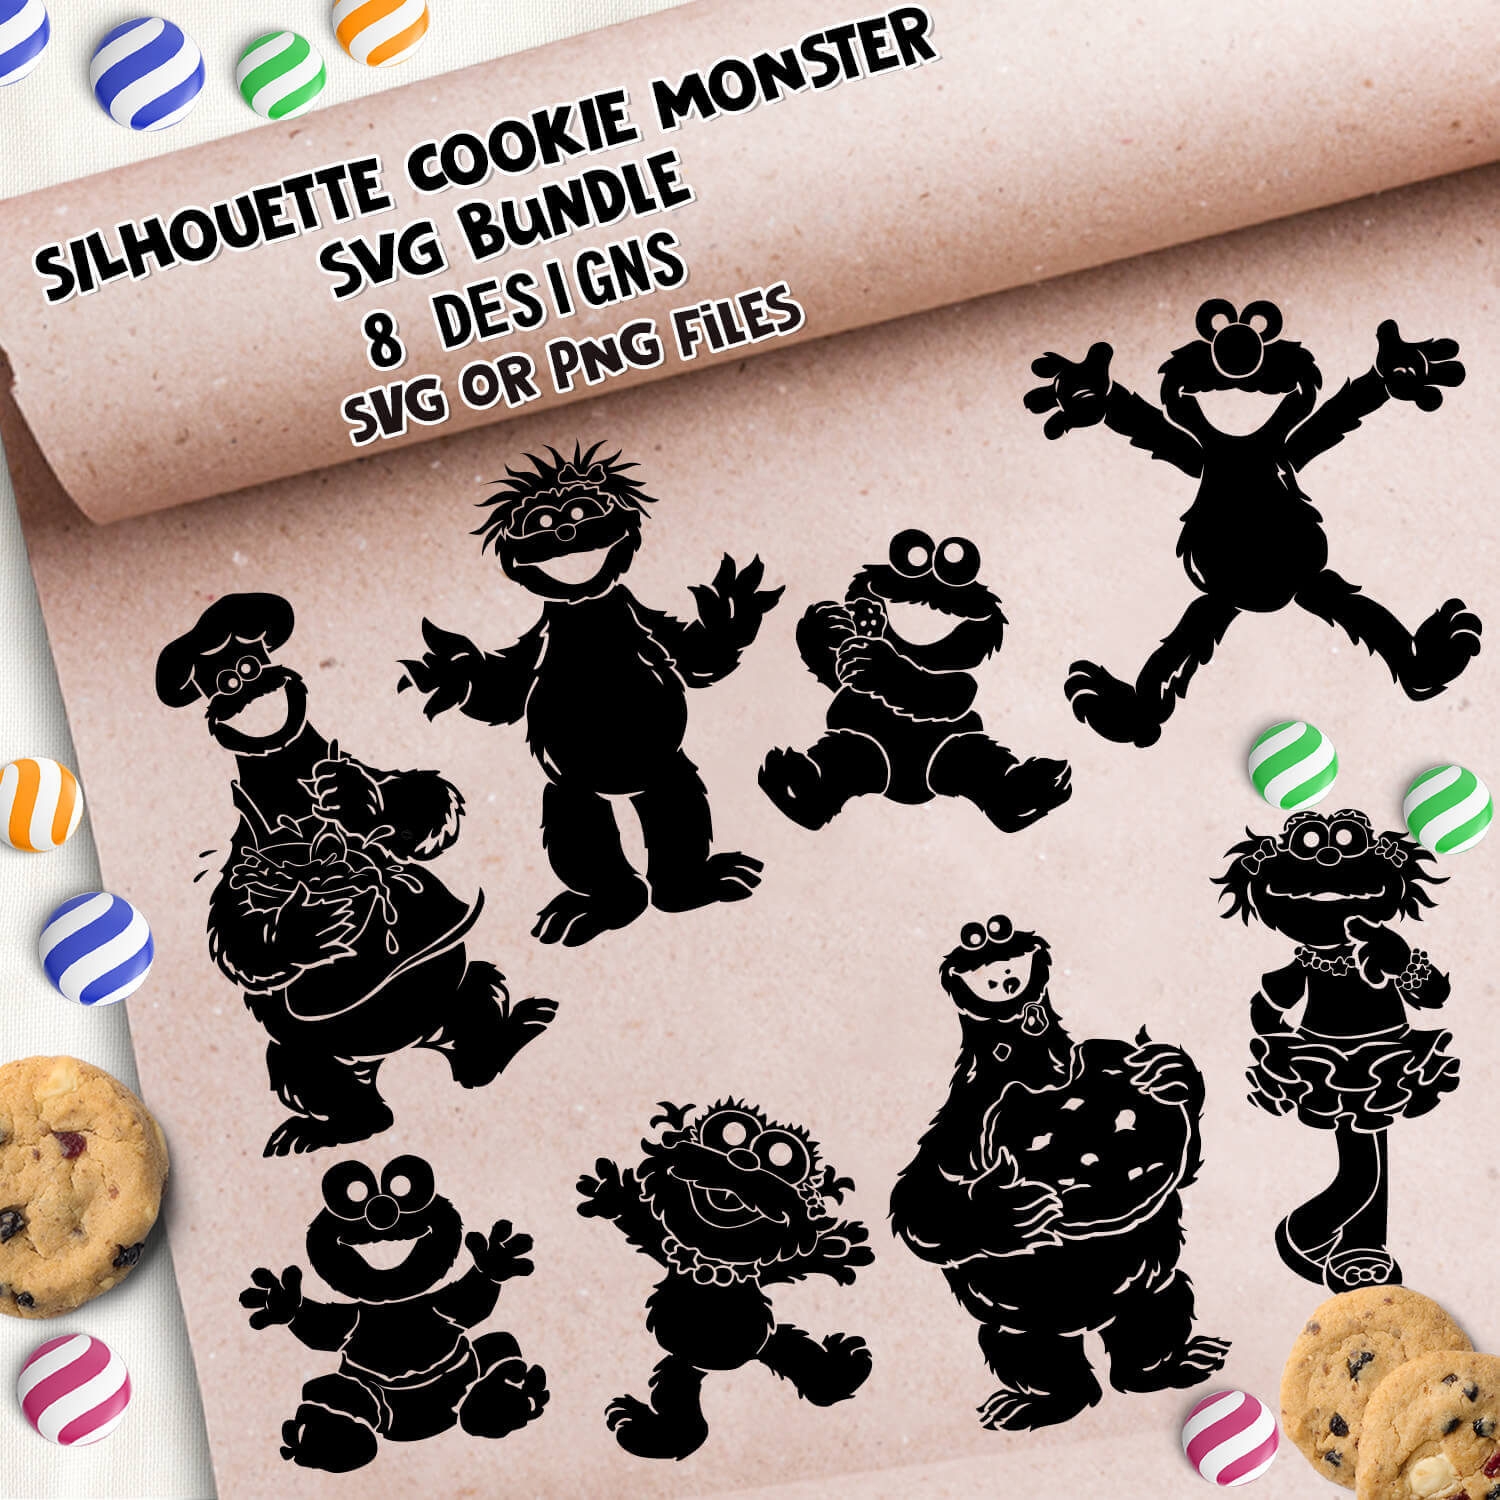 Silhouette Cookie Monster: SVG or PNG files.